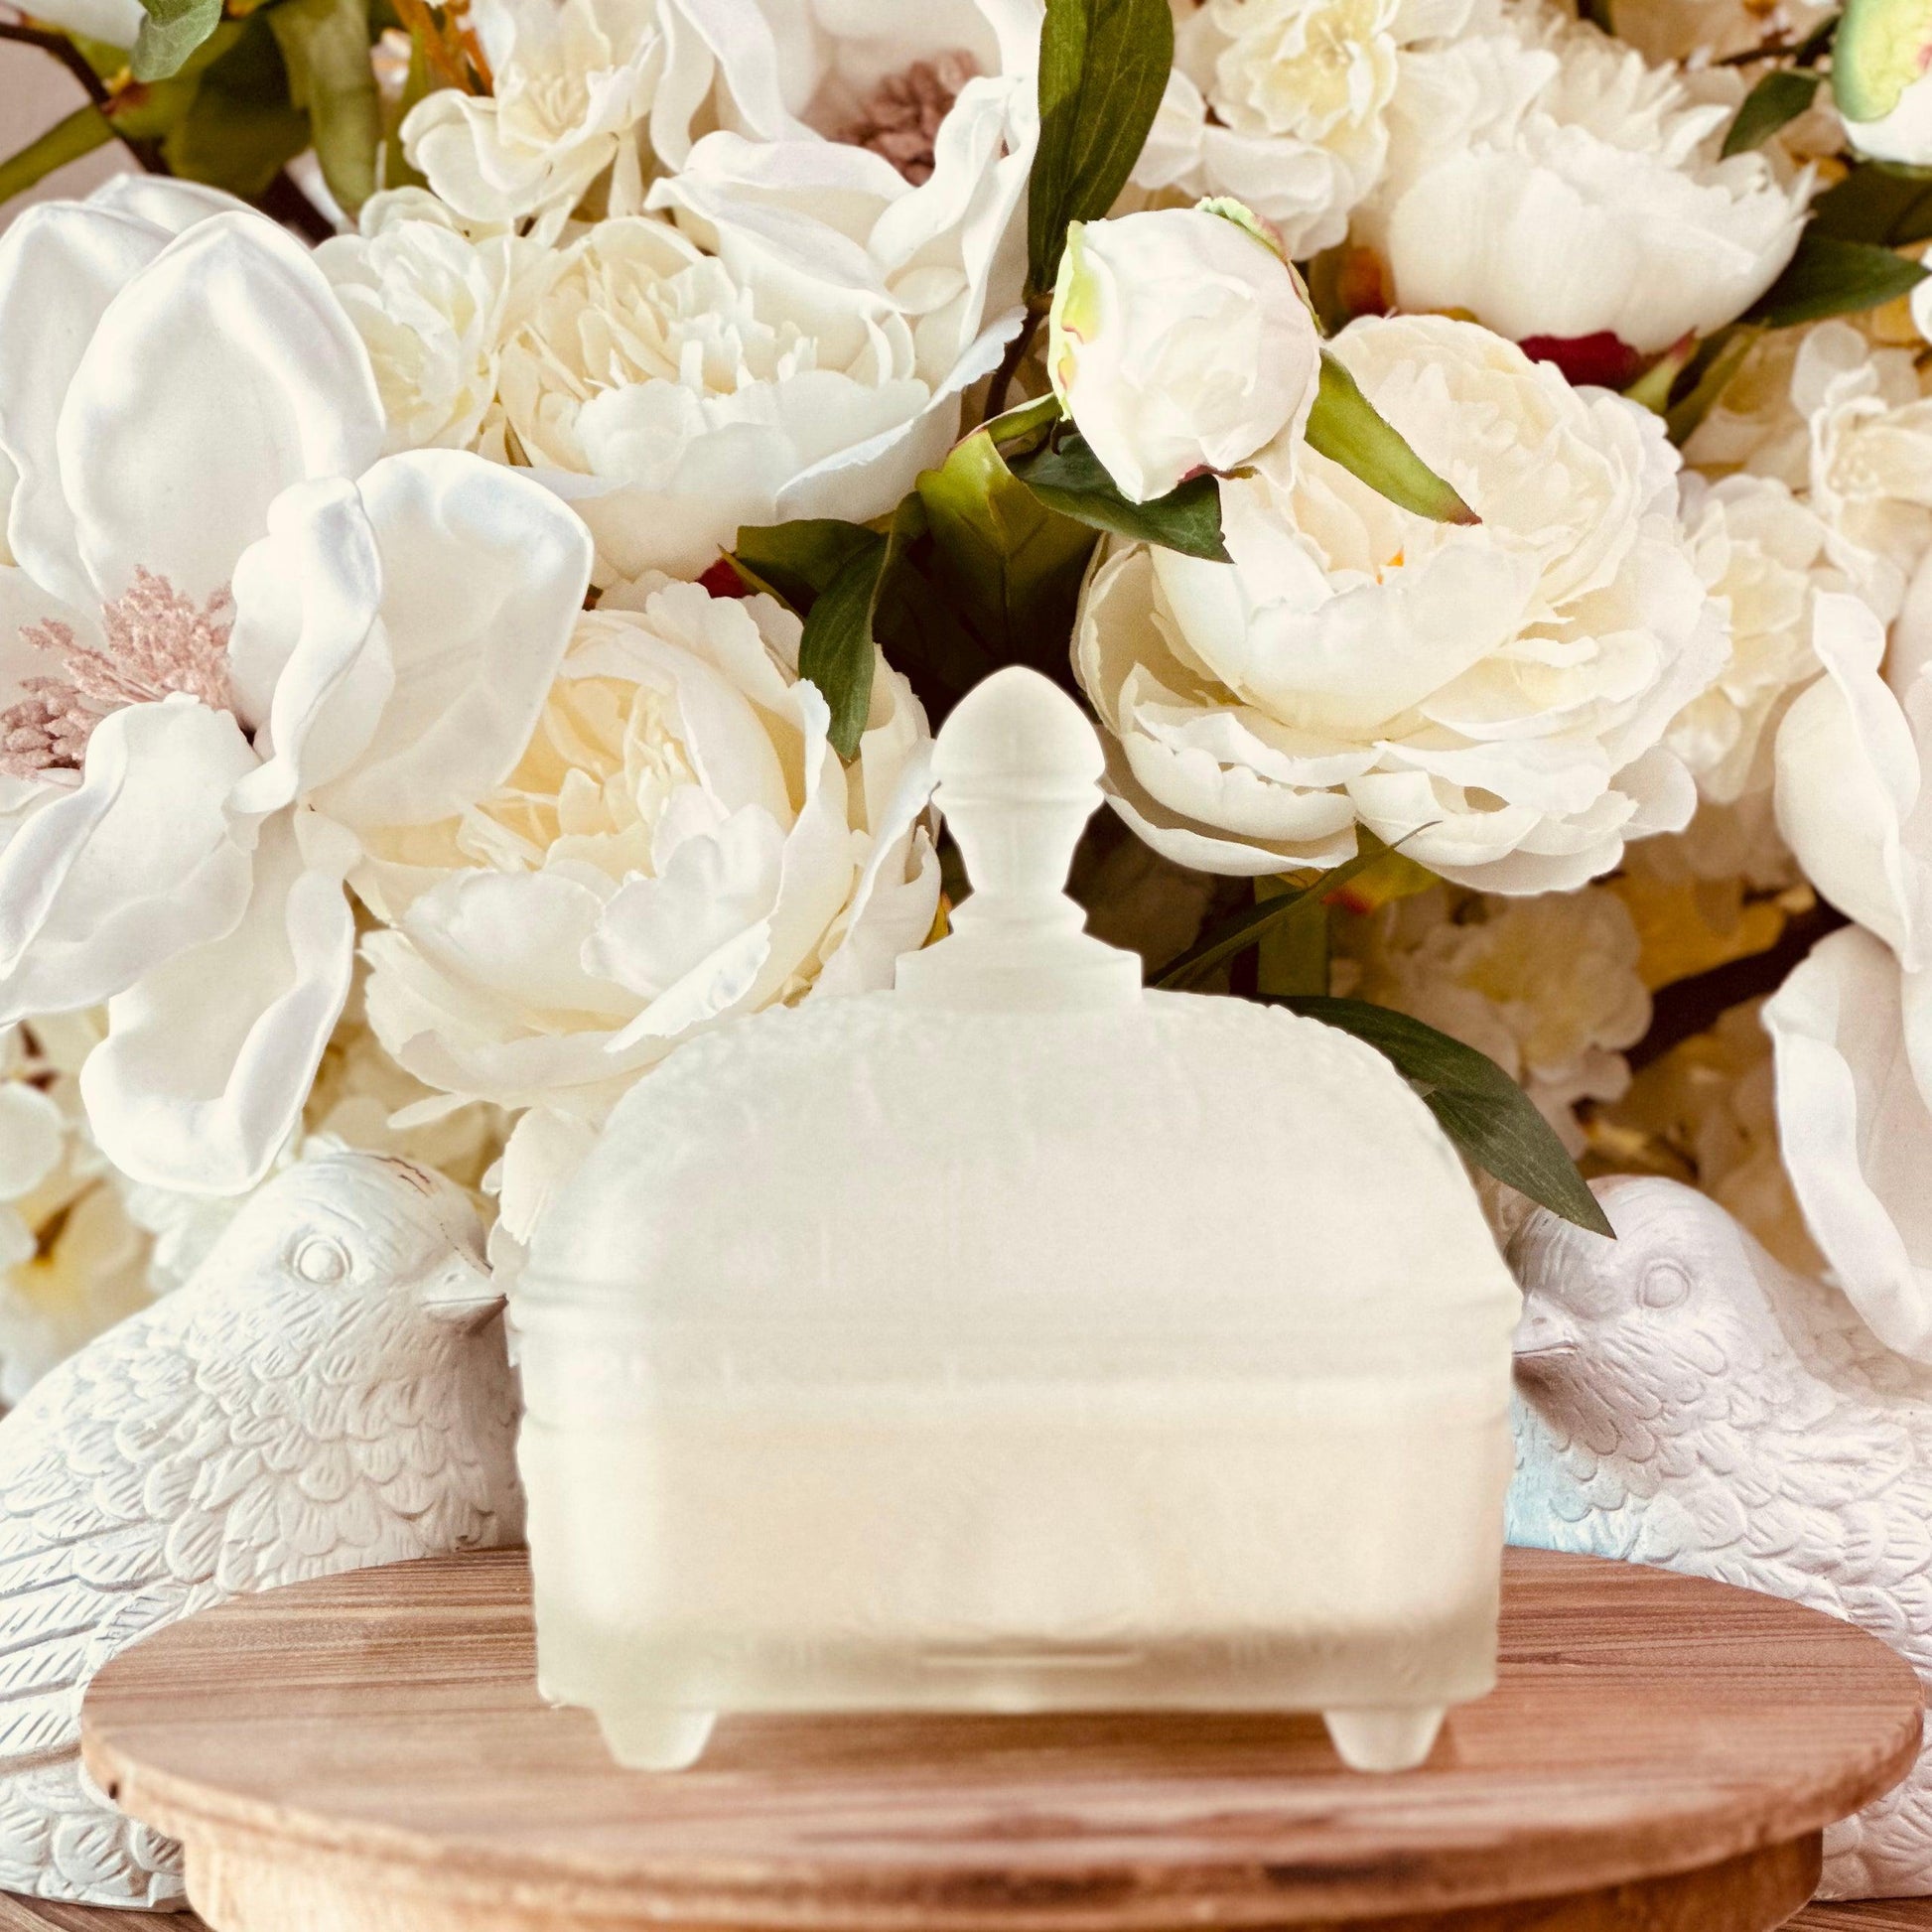 Vintage Tiara Satin Honey Bee Hive Candy Dish - Southern Amaretto Soy Candle-Vintage Glass Candles-tbgypsysoul